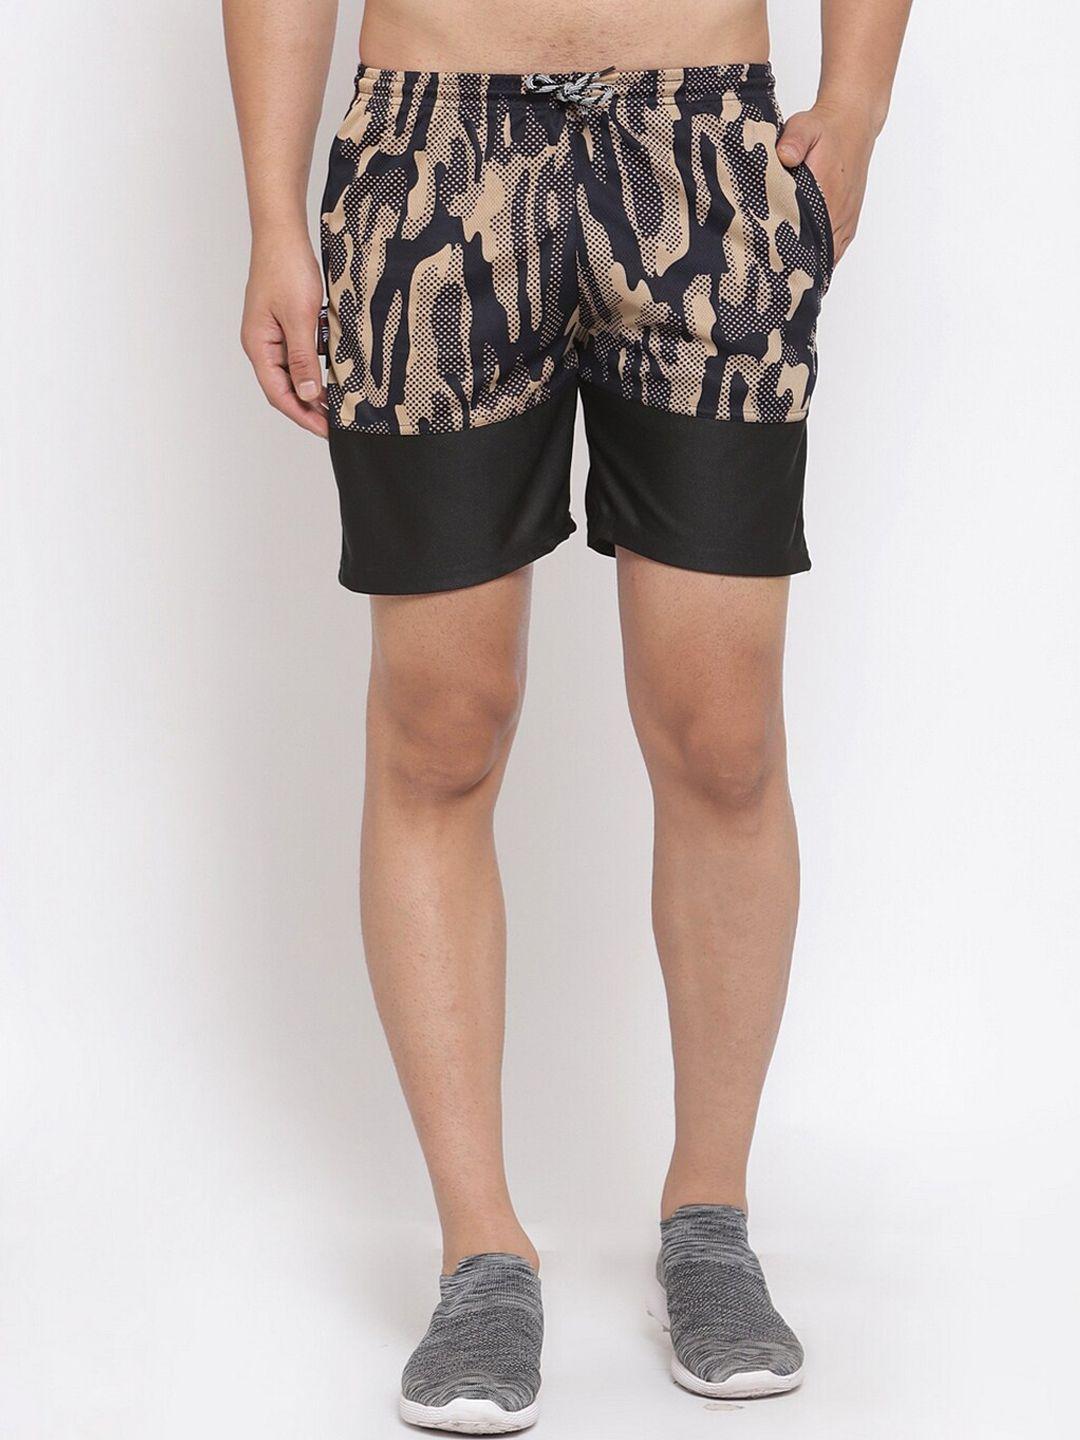 klotthe-men-abstract-printed-rapid-dry-sports-shorts